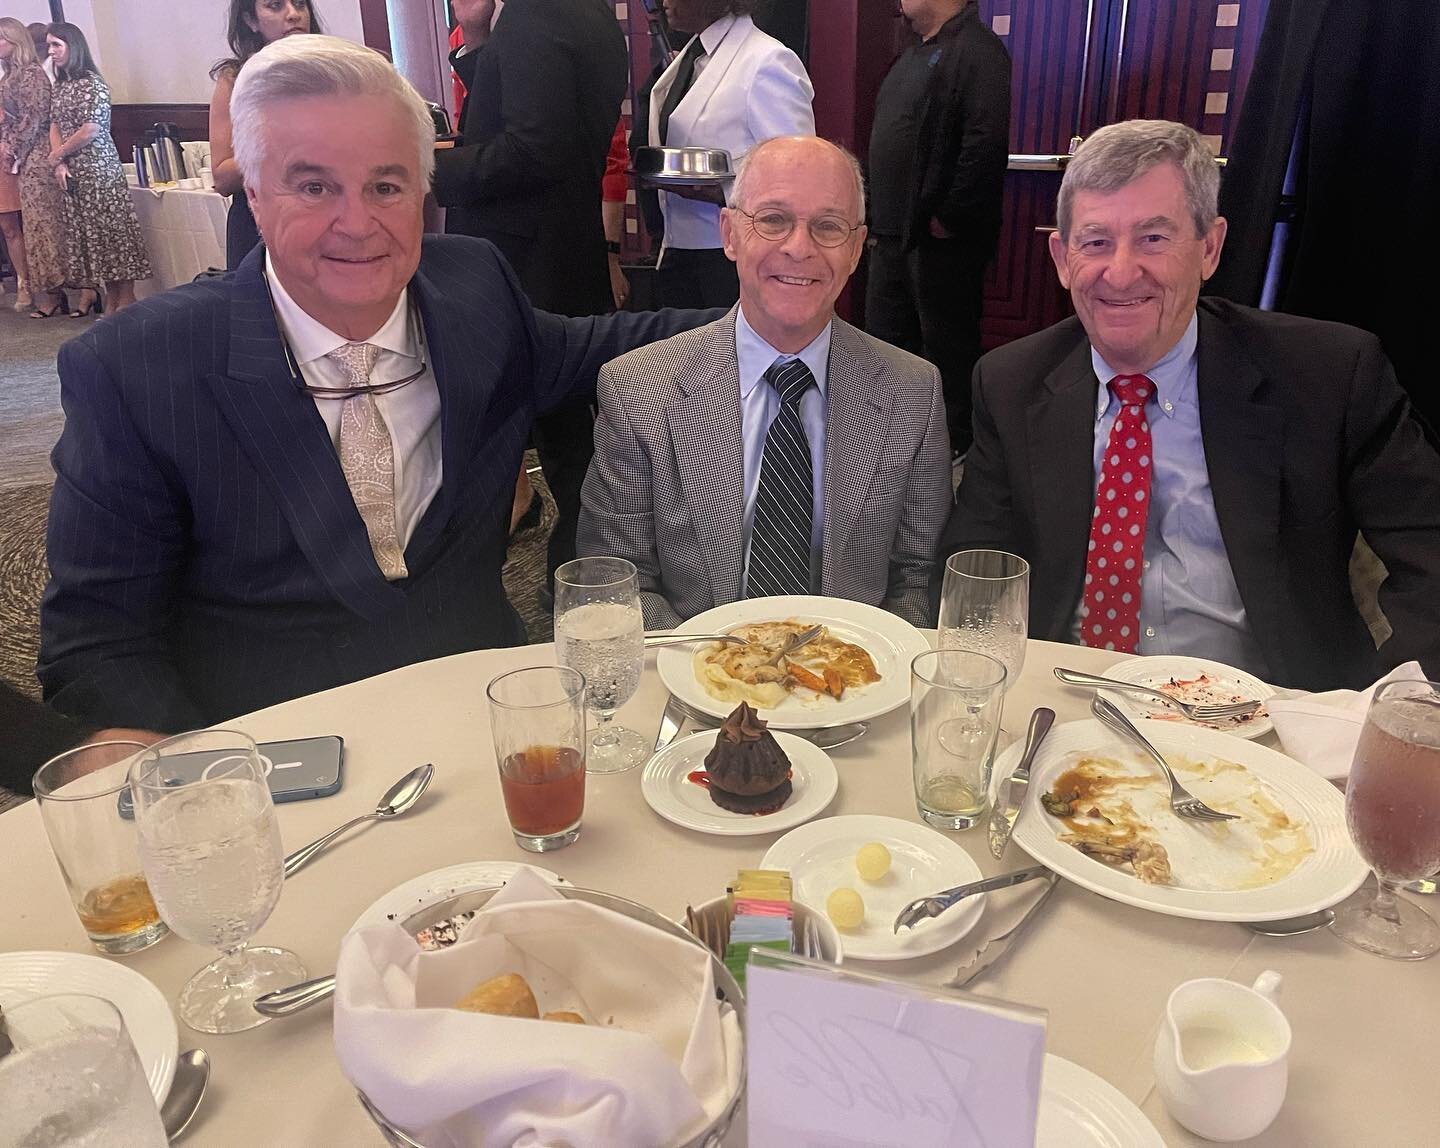 Another great @forumclubpb event this afternoon. Matrix is a proud season table holder of The Forum club, which is Florida&rsquo;s largest non-profit non-partisan and political affairs organization. (Pictured Matrix Mediators Rodney Romano, Bob Moses